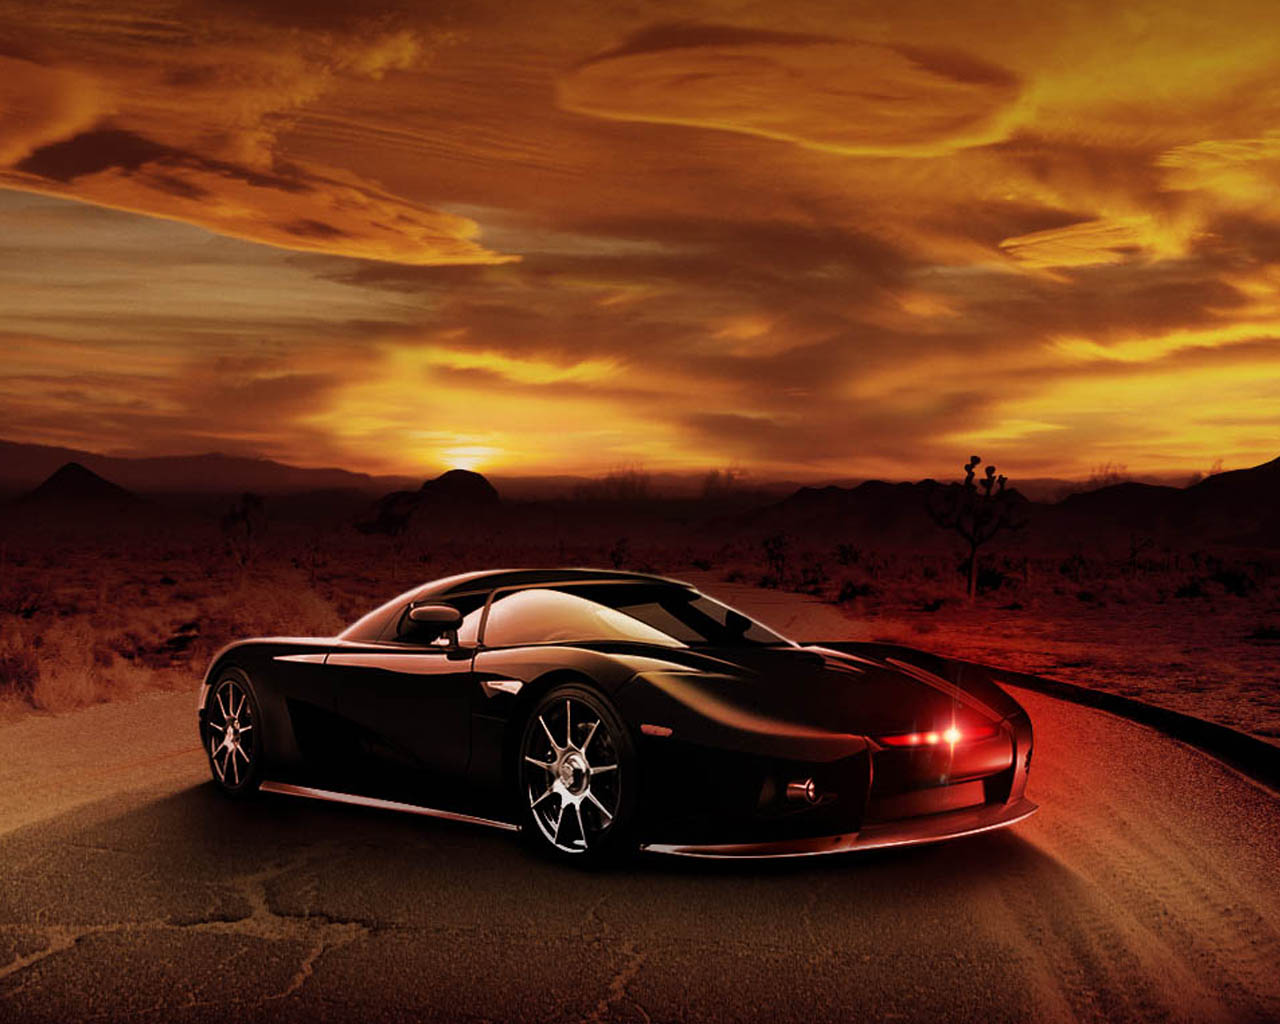 Knight Rider Desktop Wallpaper For HD Widescreen And Mobile